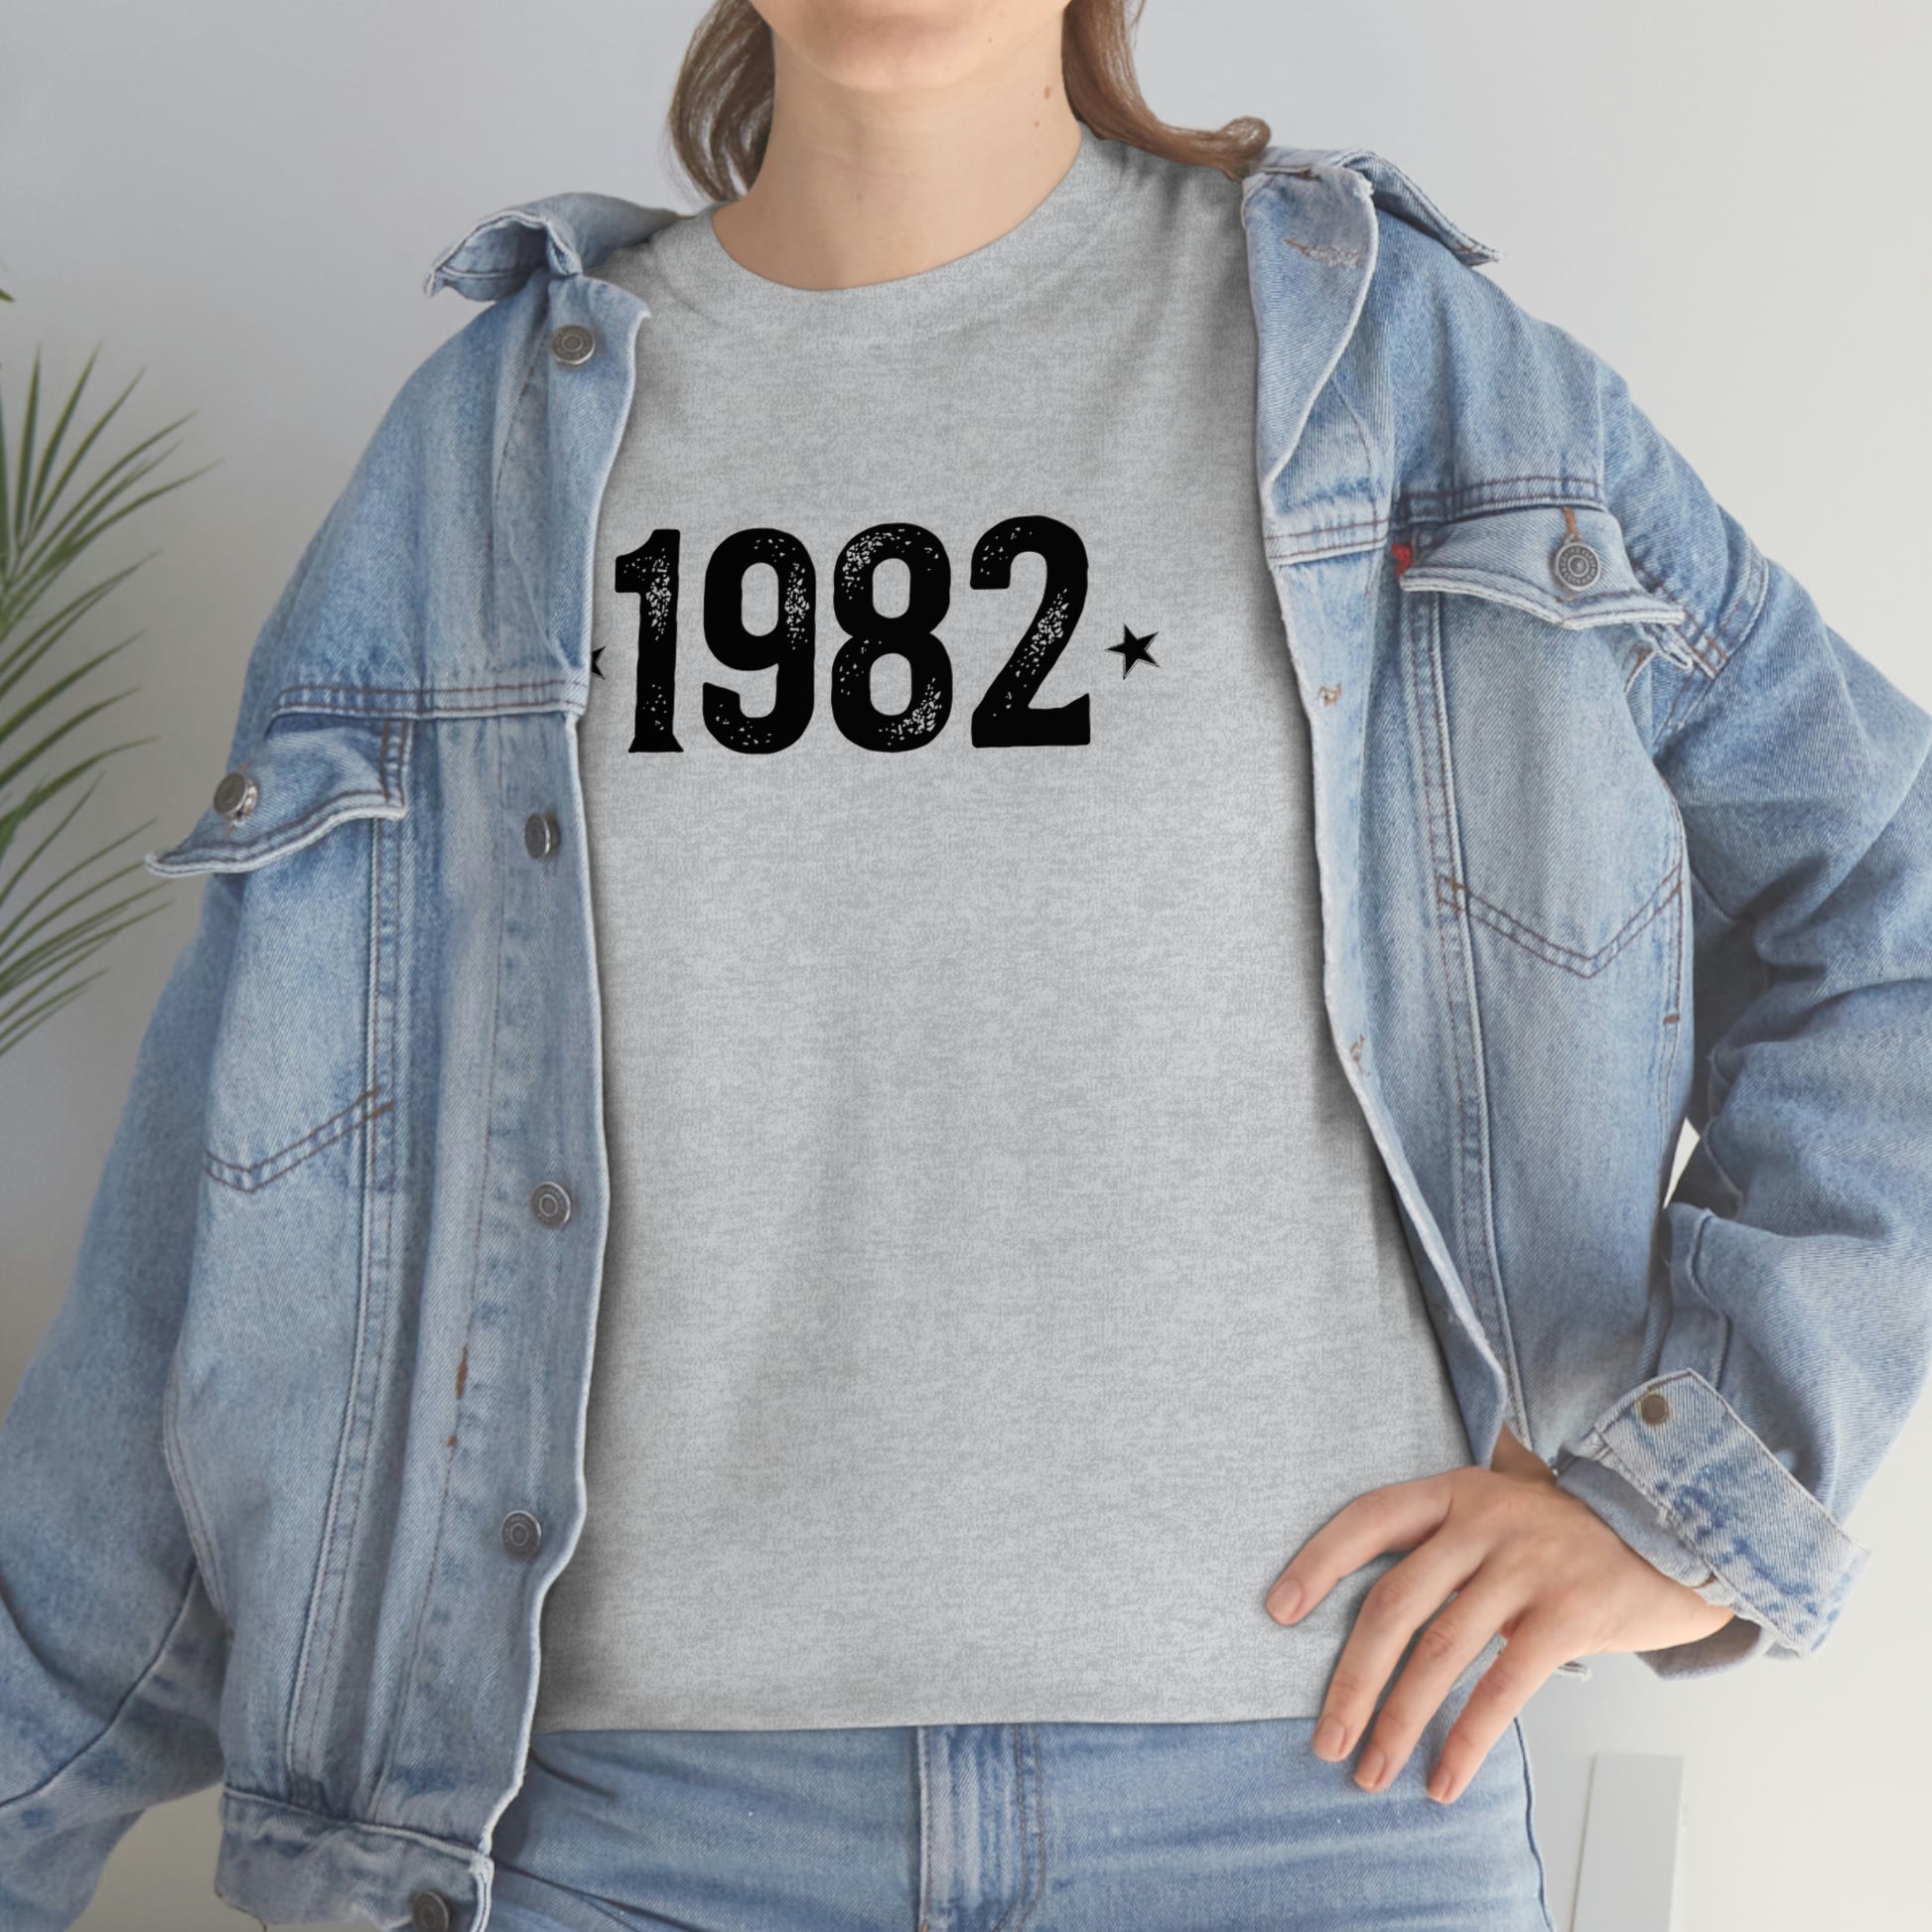 "1982 Birthday Year" T-Shirt - Weave Got Gifts - Unique Gifts You Won’t Find Anywhere Else!